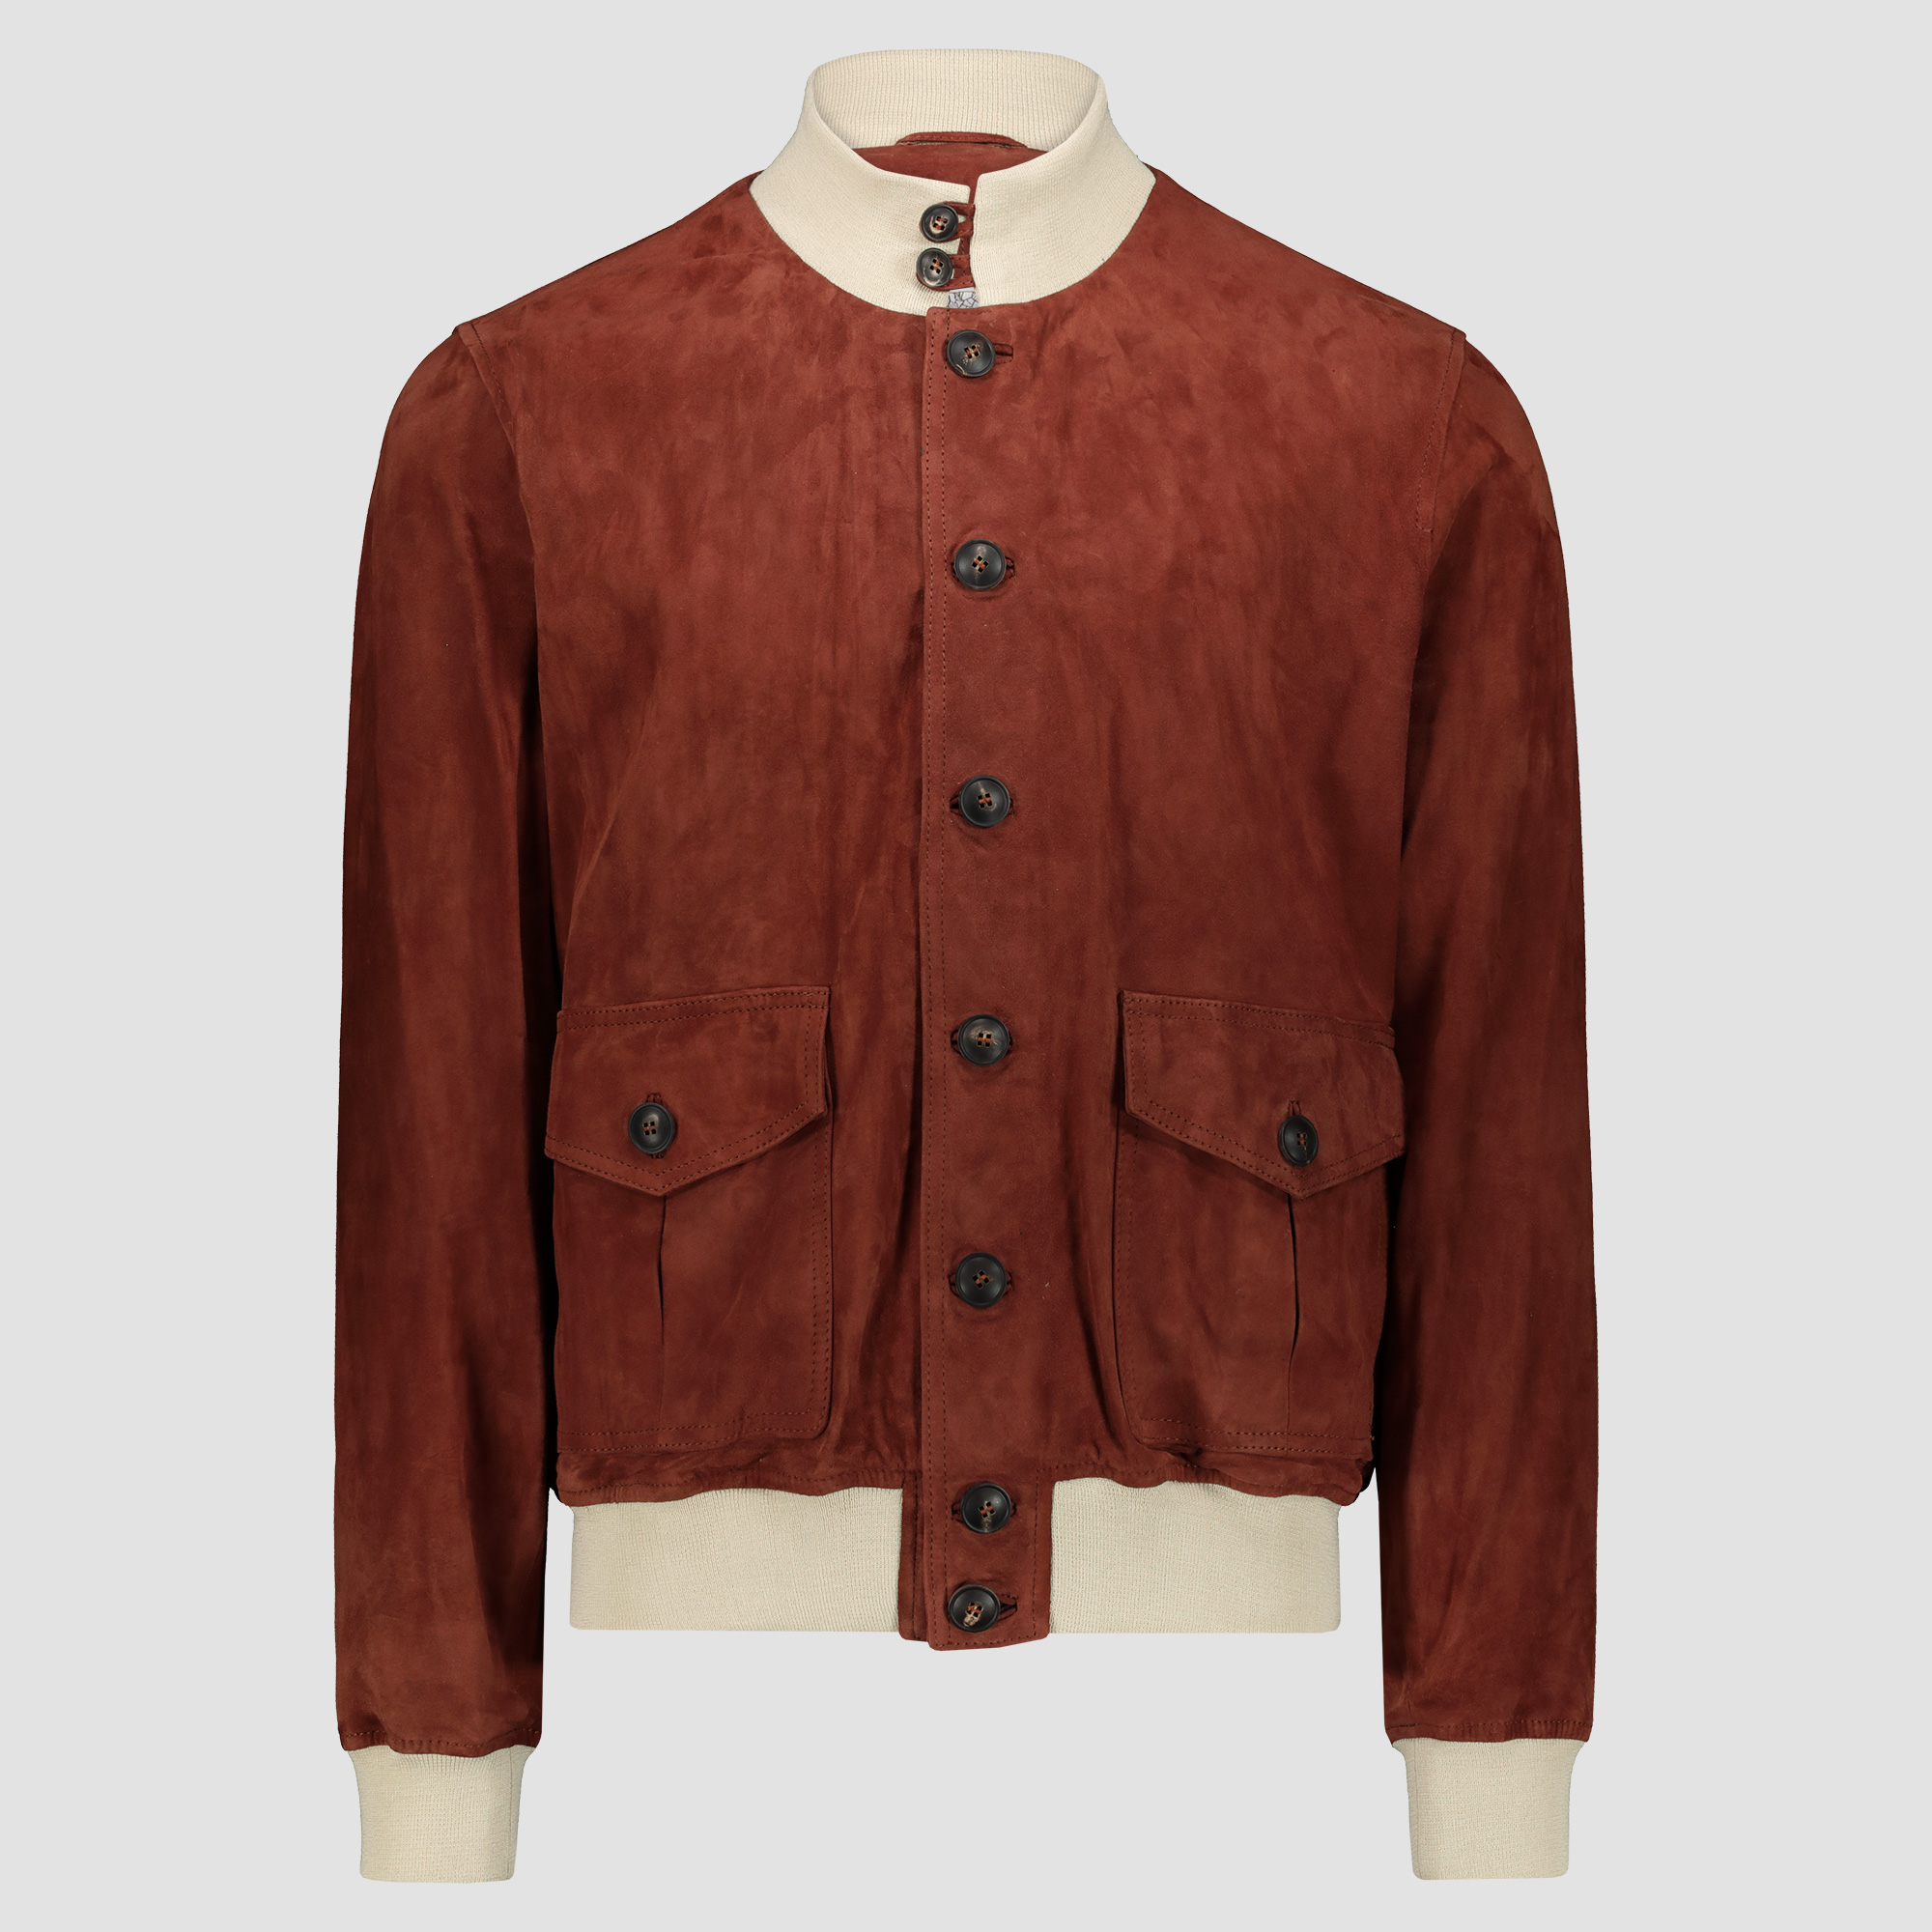 Brick suede & beige details Bomber Jacket A1 Cary